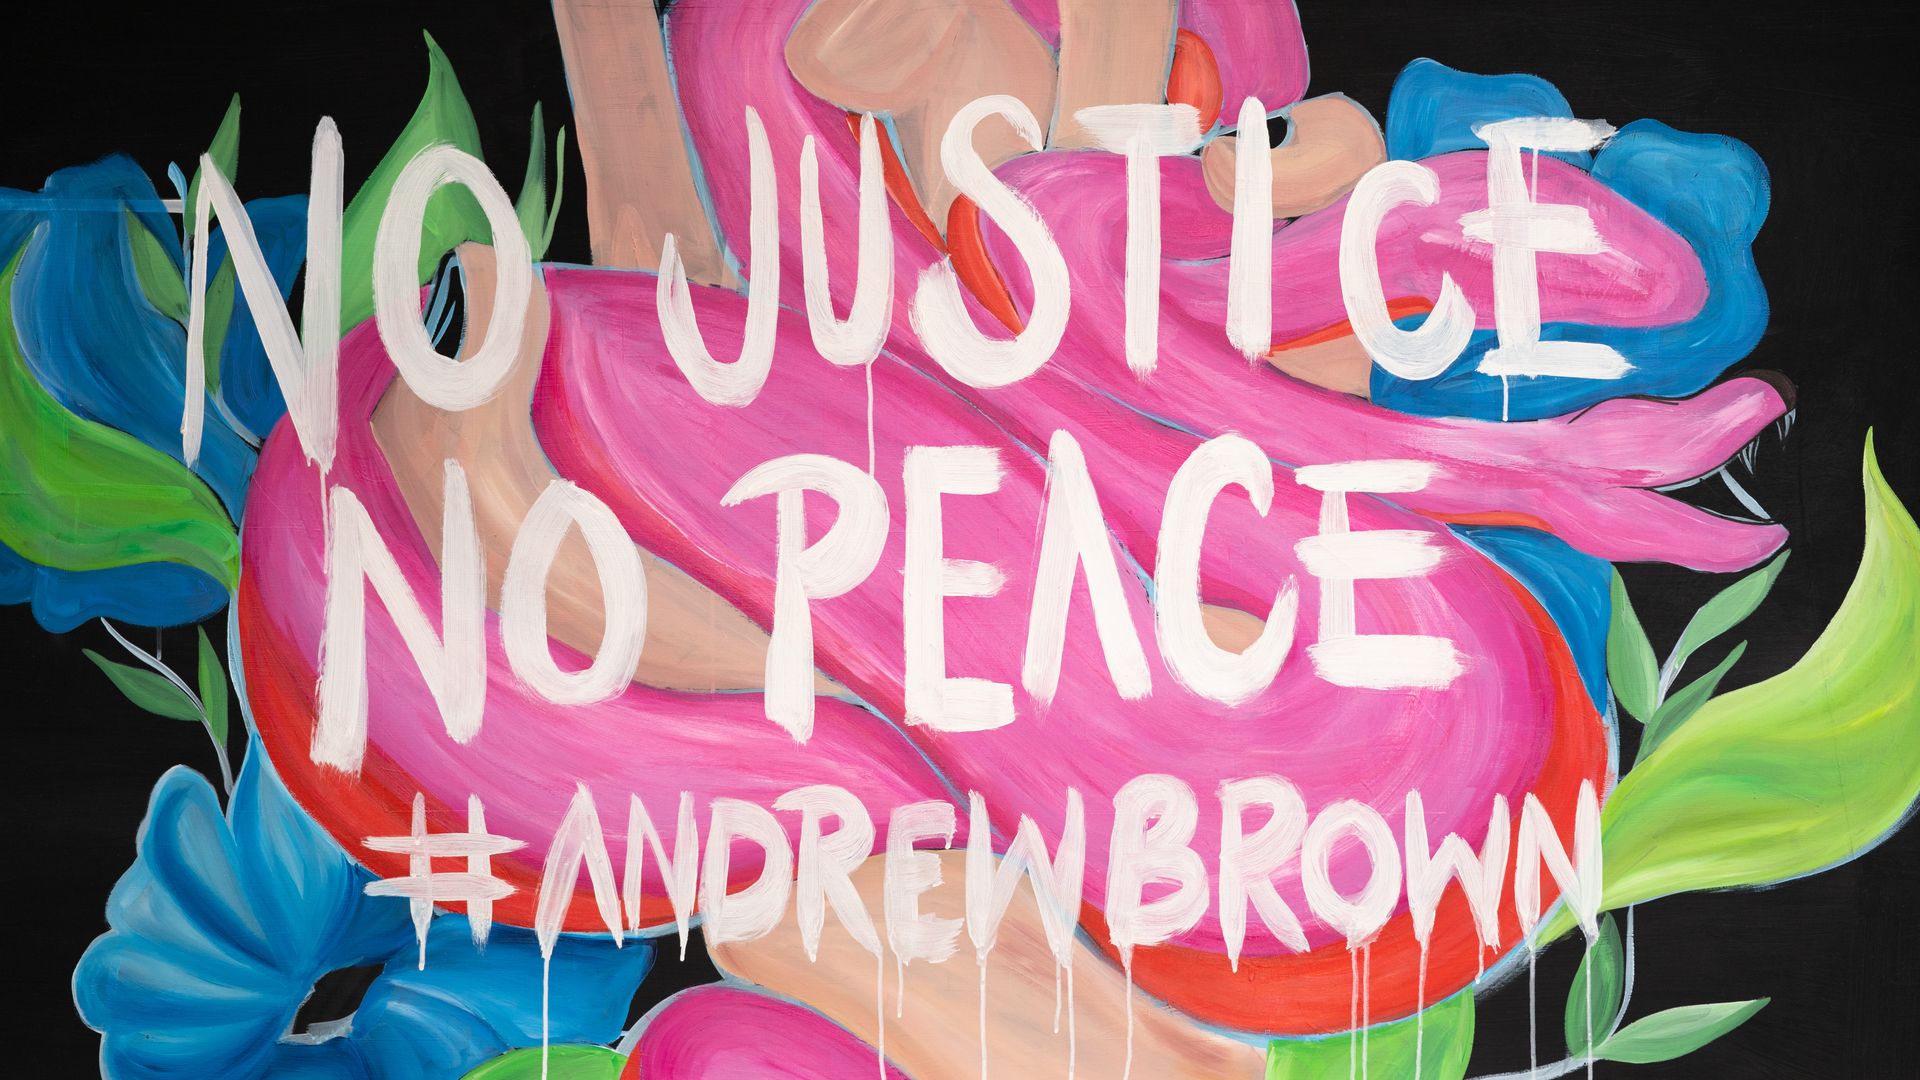 Picture of a mural that says "NO JUSTICE NO PEACE #ANDREWBROWN"